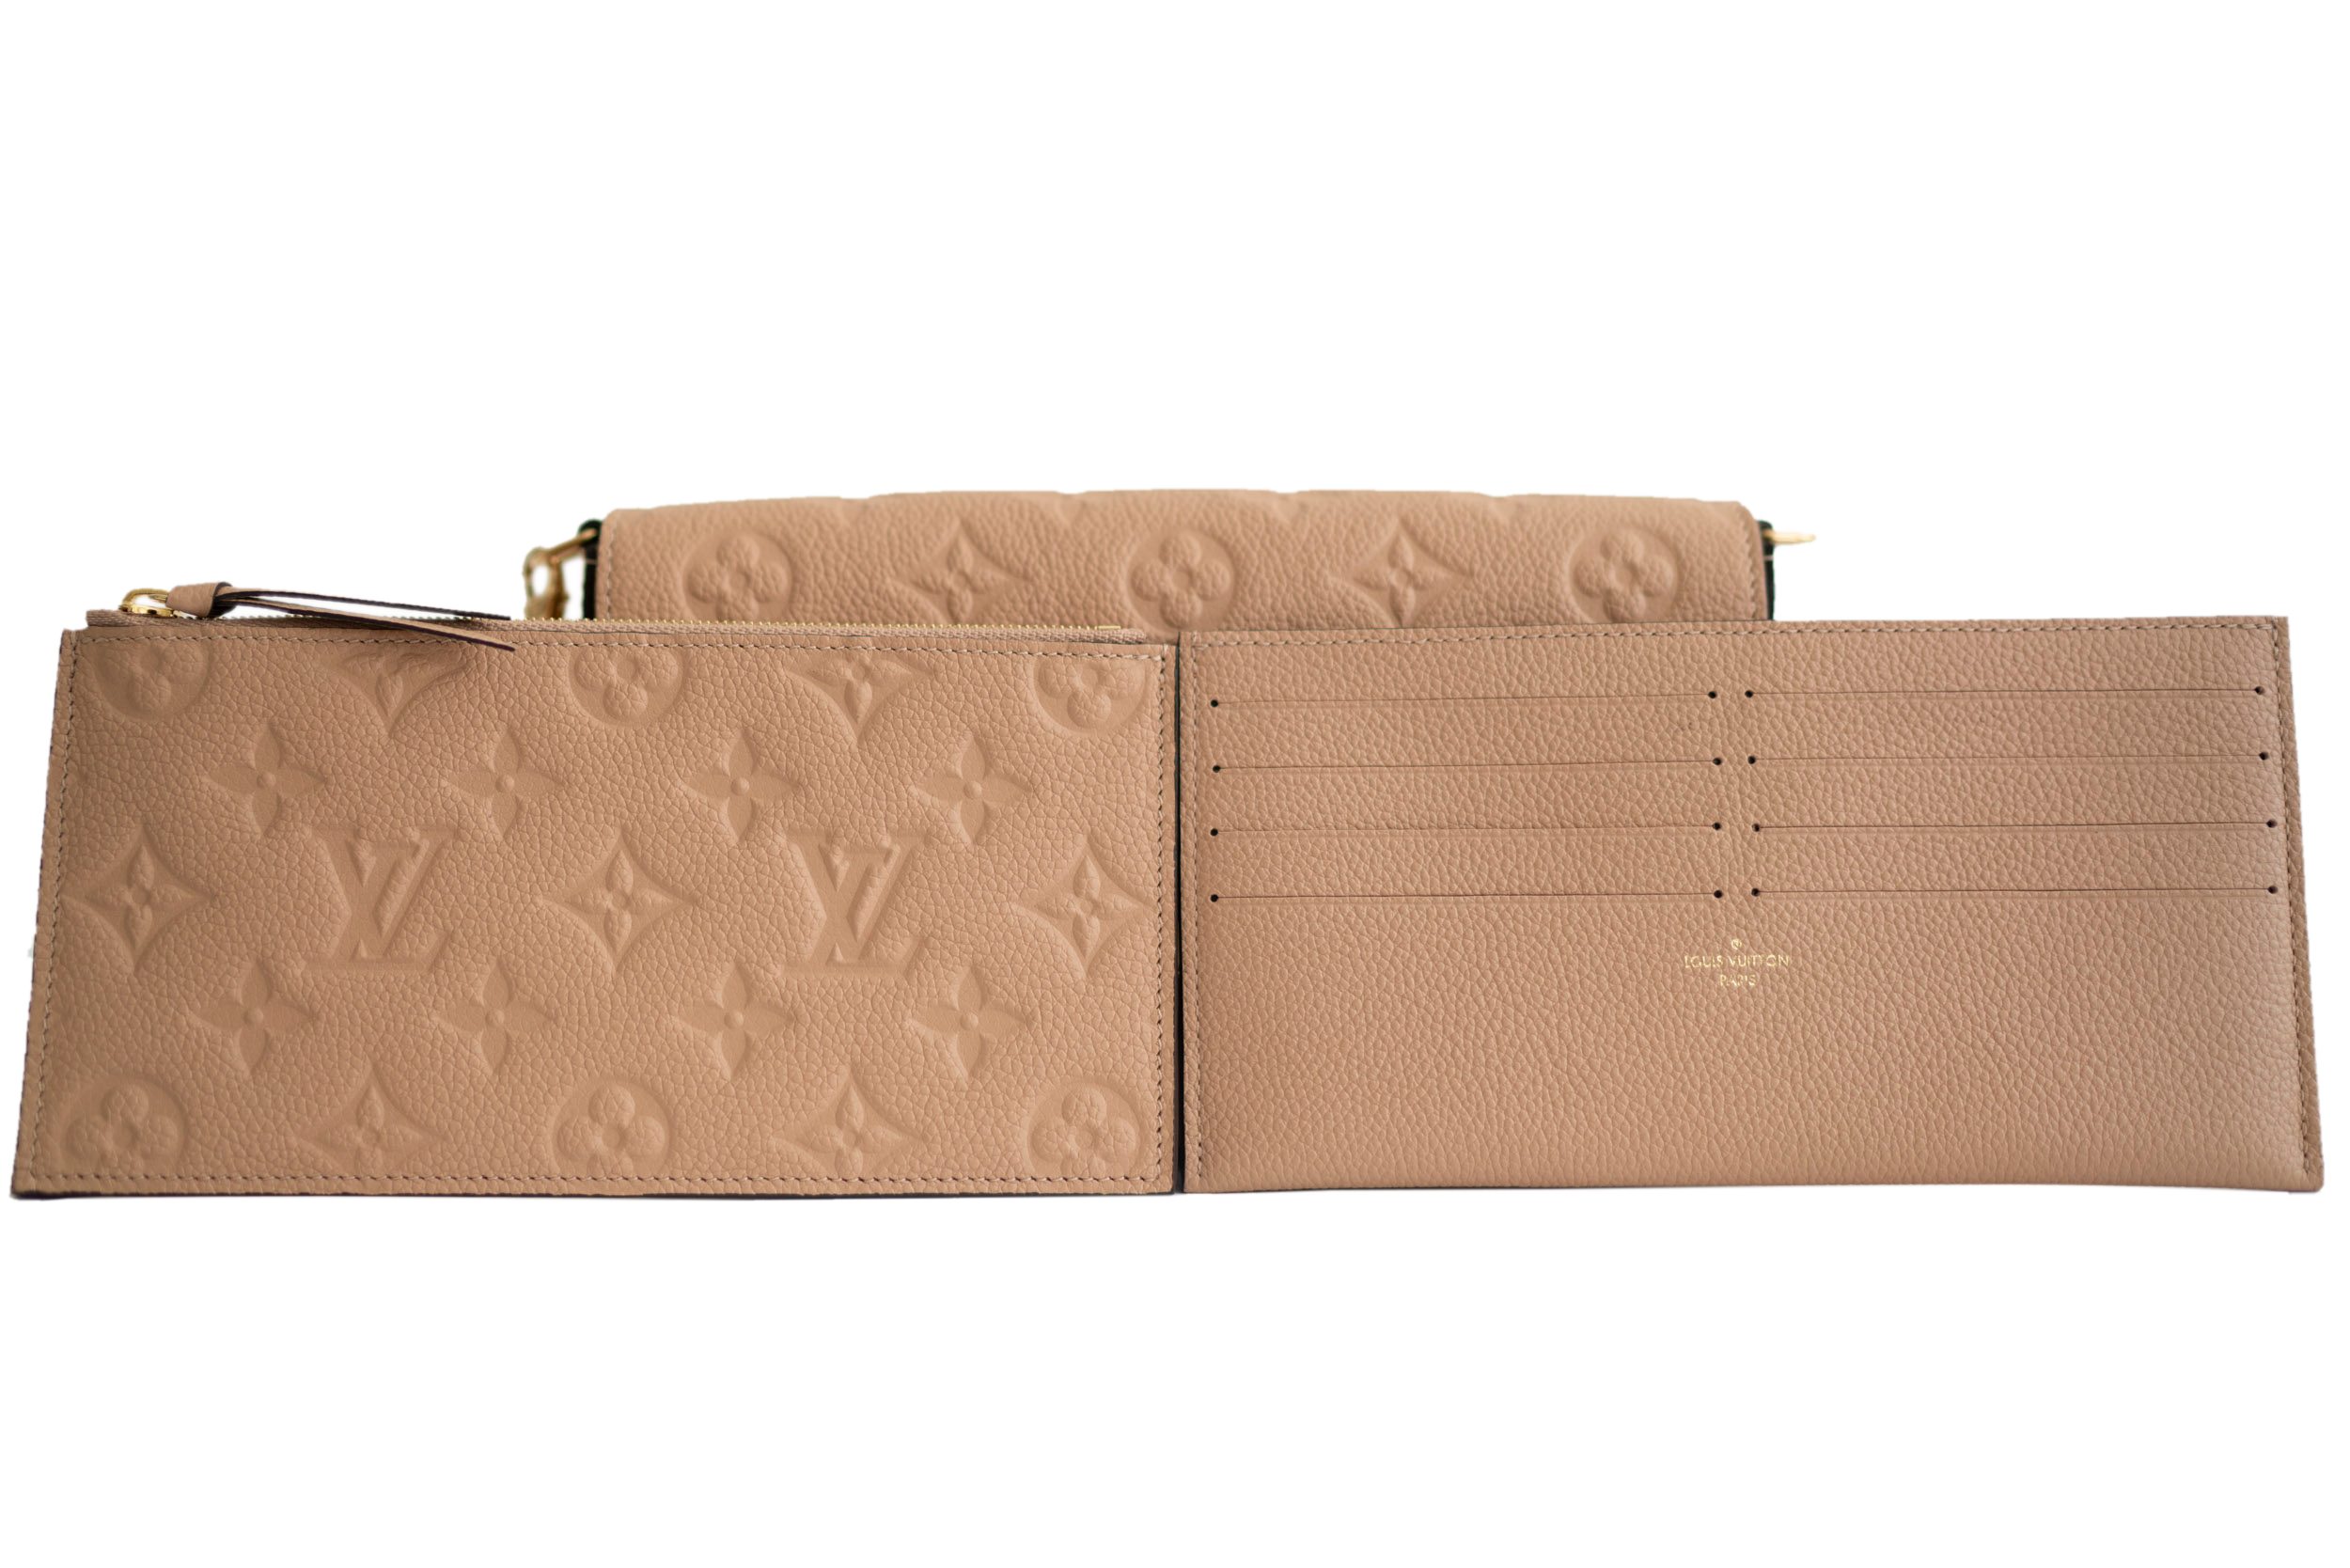 Felicie Pochette Lv Review  Natural Resource Department